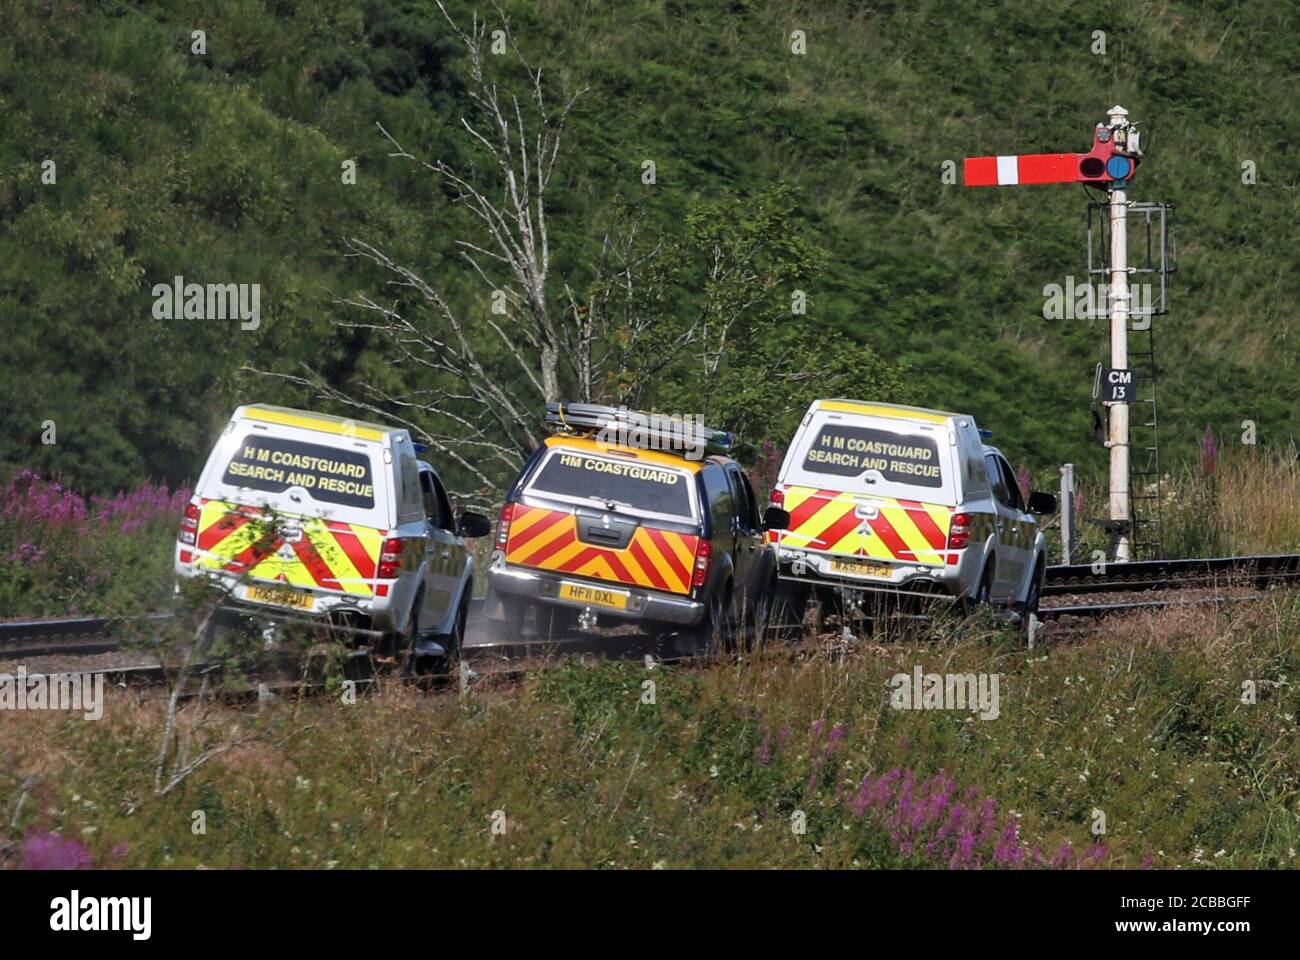 HM Coastguard vehicles at Carmont crossing, where they are accessing the train line from the road, south of the scene in Stonehaven, Aberdeenshire, where the 06.38 Aberdeen to Stonehaven ScotRail train derailed at about 9.40am this morning. The fire service, police and ambulance service are in attendance and the incident is ongoing. Stock Photo